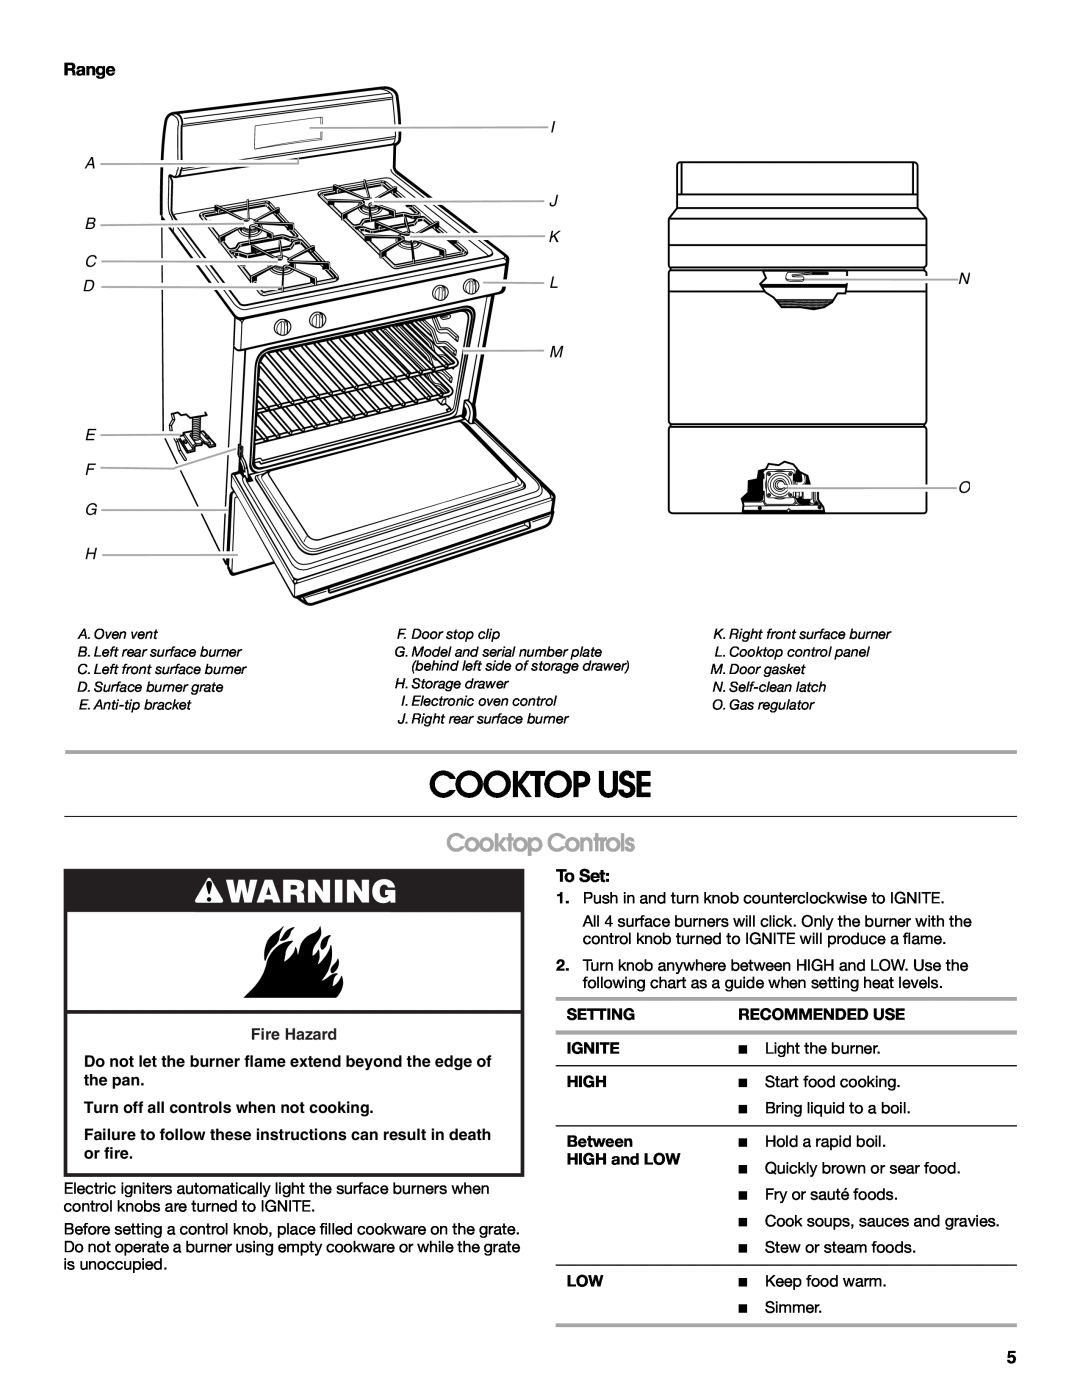 Whirlpool TGS325MQ3 Cooktop Use, Cooktop Controls, Range, To Set, Fire Hazard, Turn off all controls when not cooking 